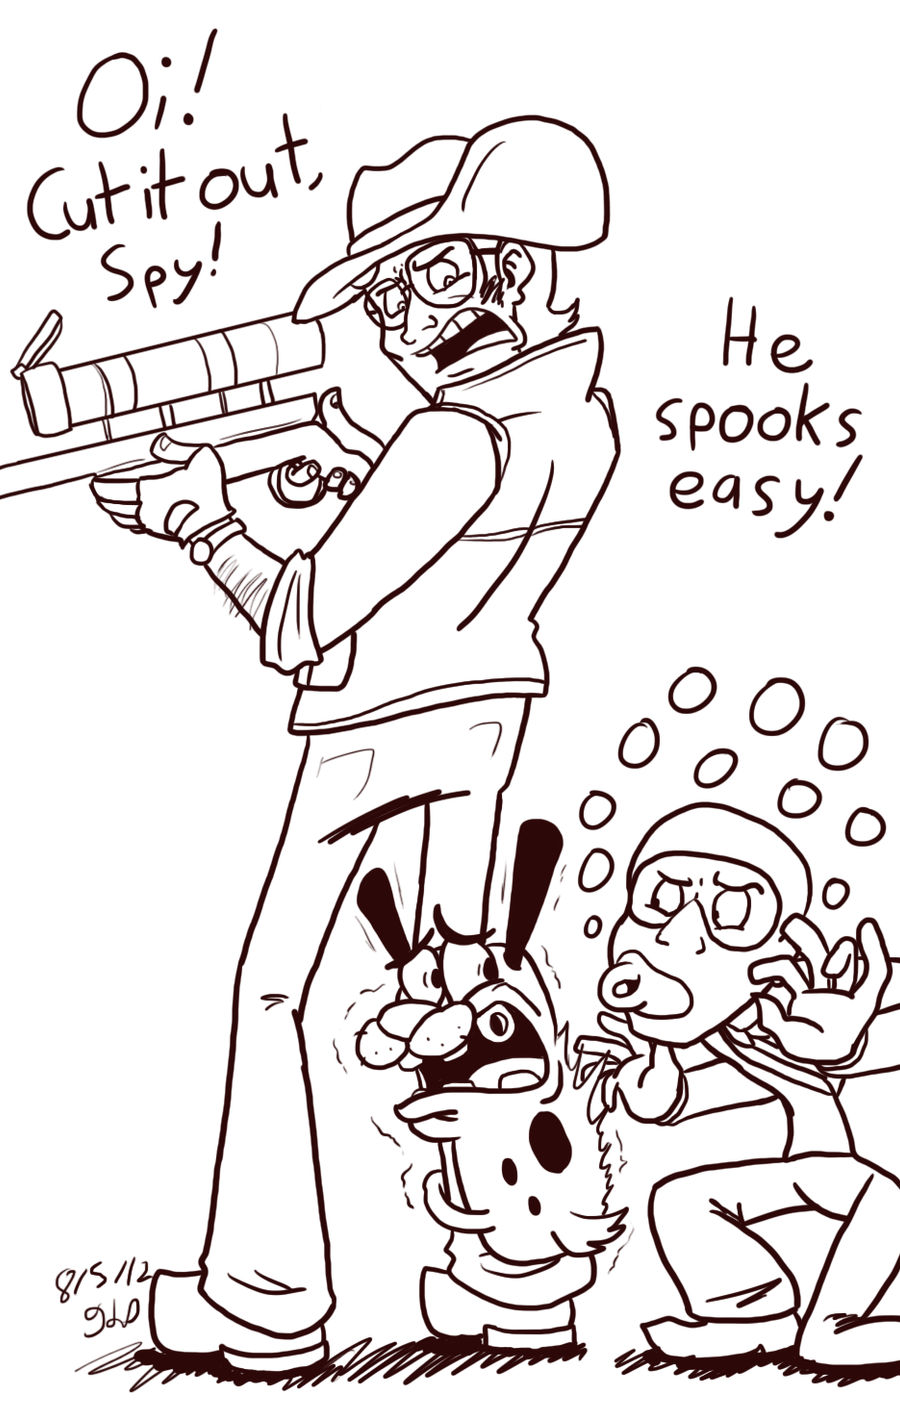 He Spooks Easy (see links in Artist Comment!)